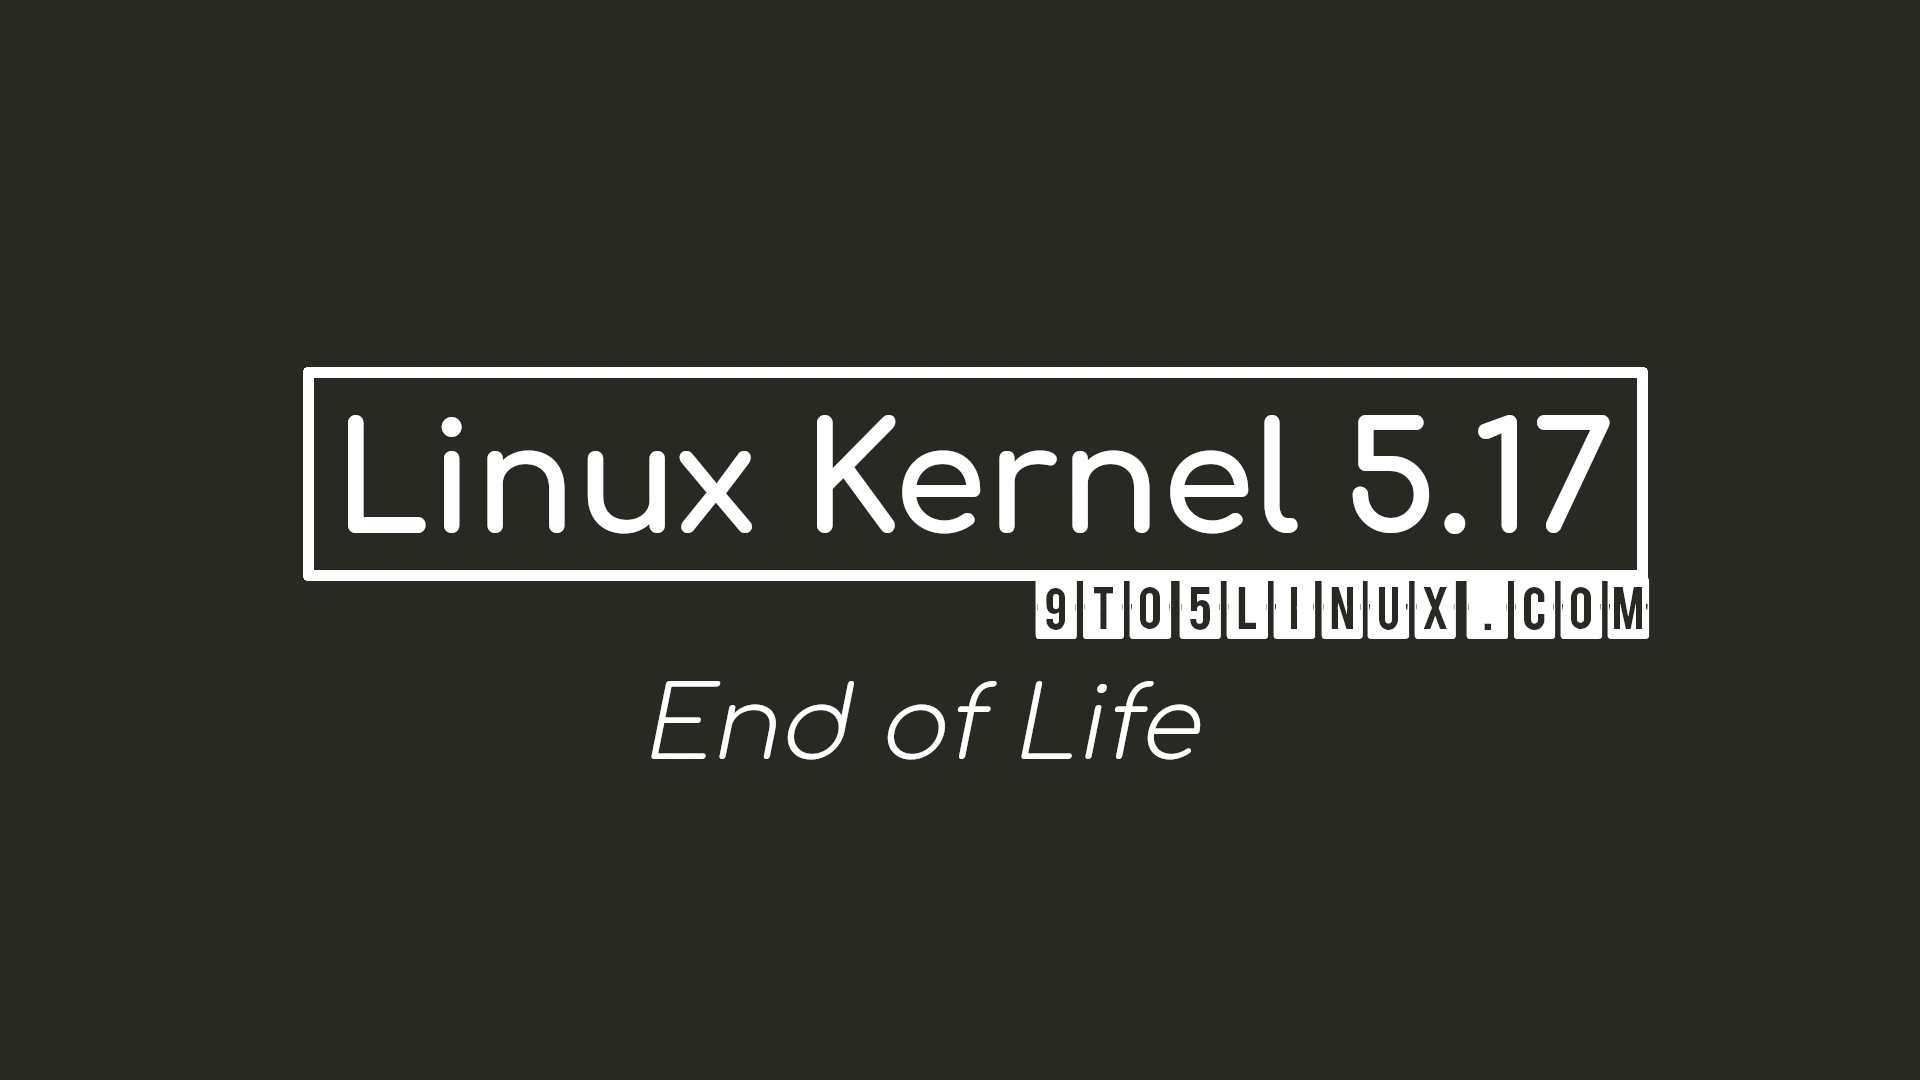 Linux Kernel 5.17 Reaches End of Life, Users Urged to Upgrade to Linux 5.18